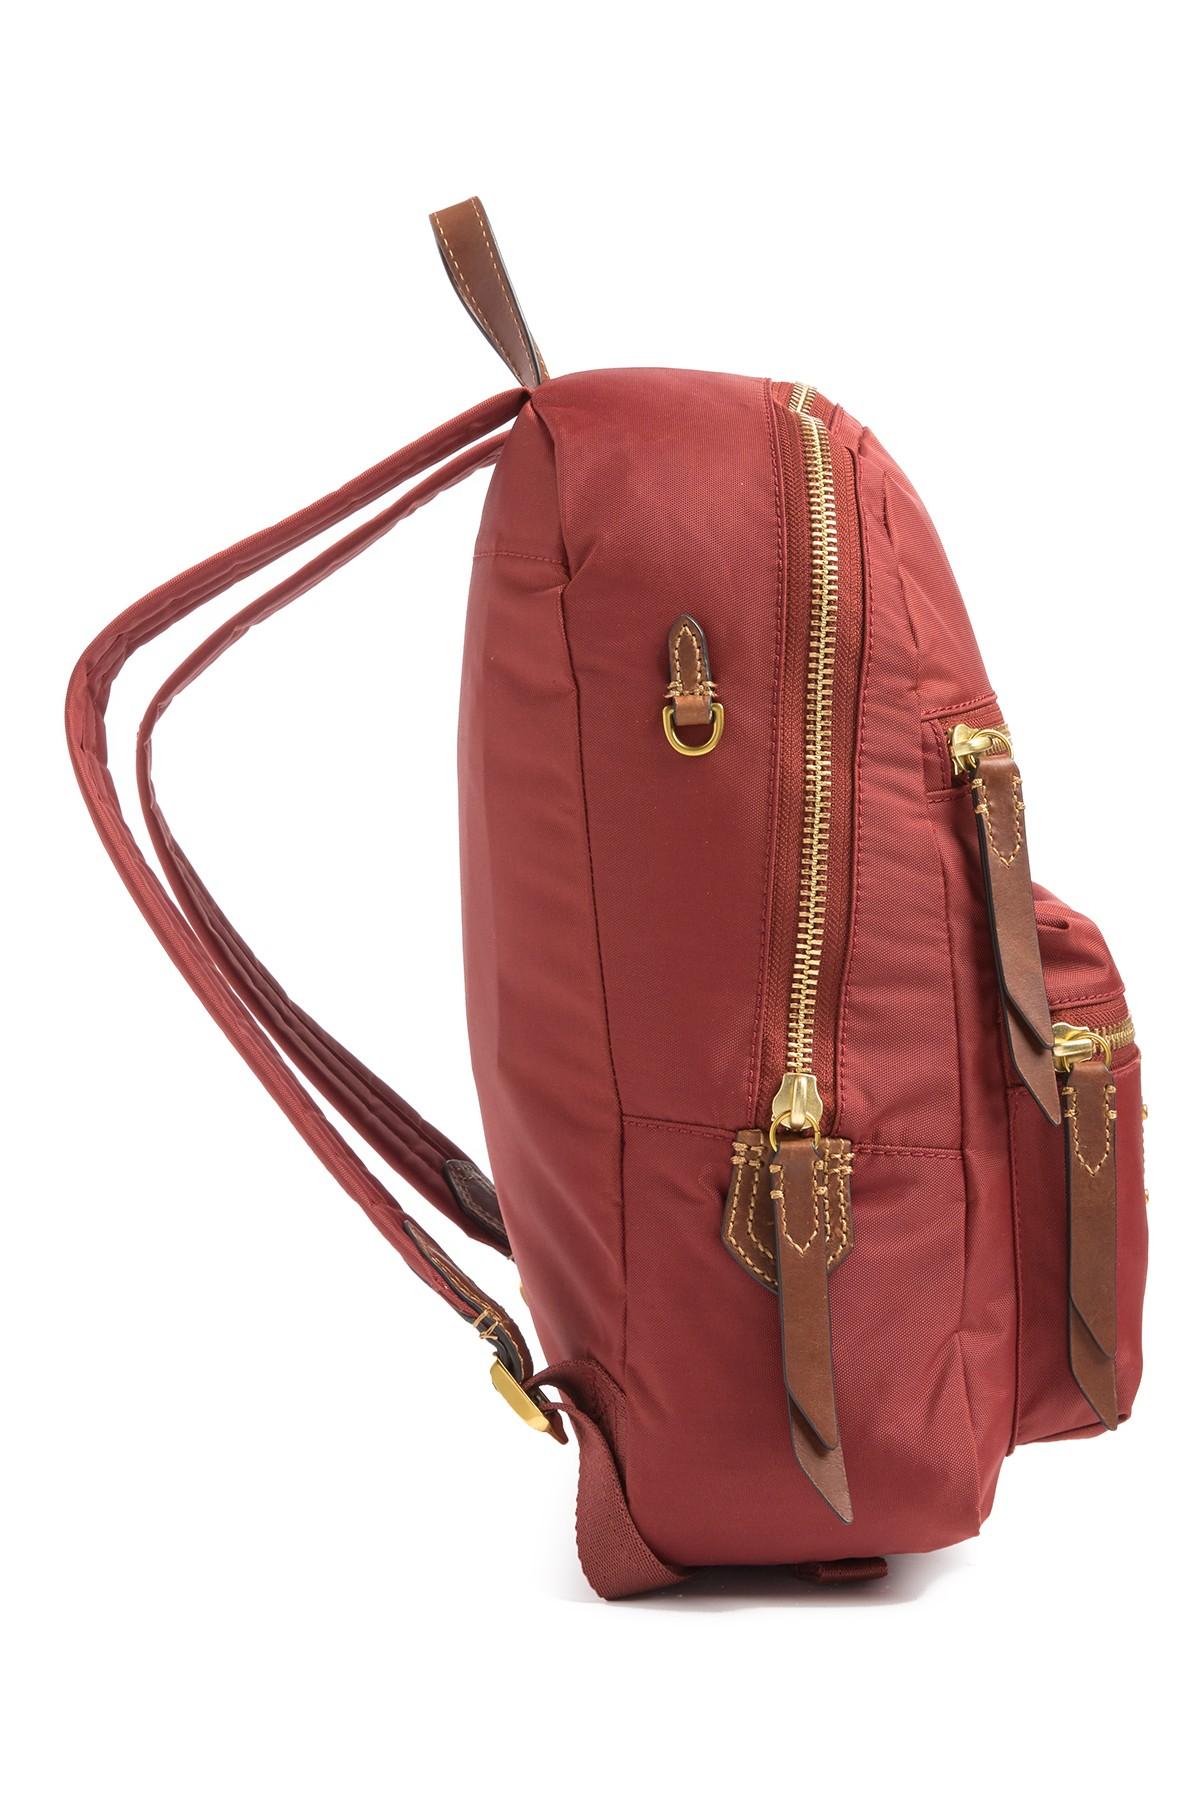 Lyst - Frye Ivy Nylon School Backpack in Red - Save 20%